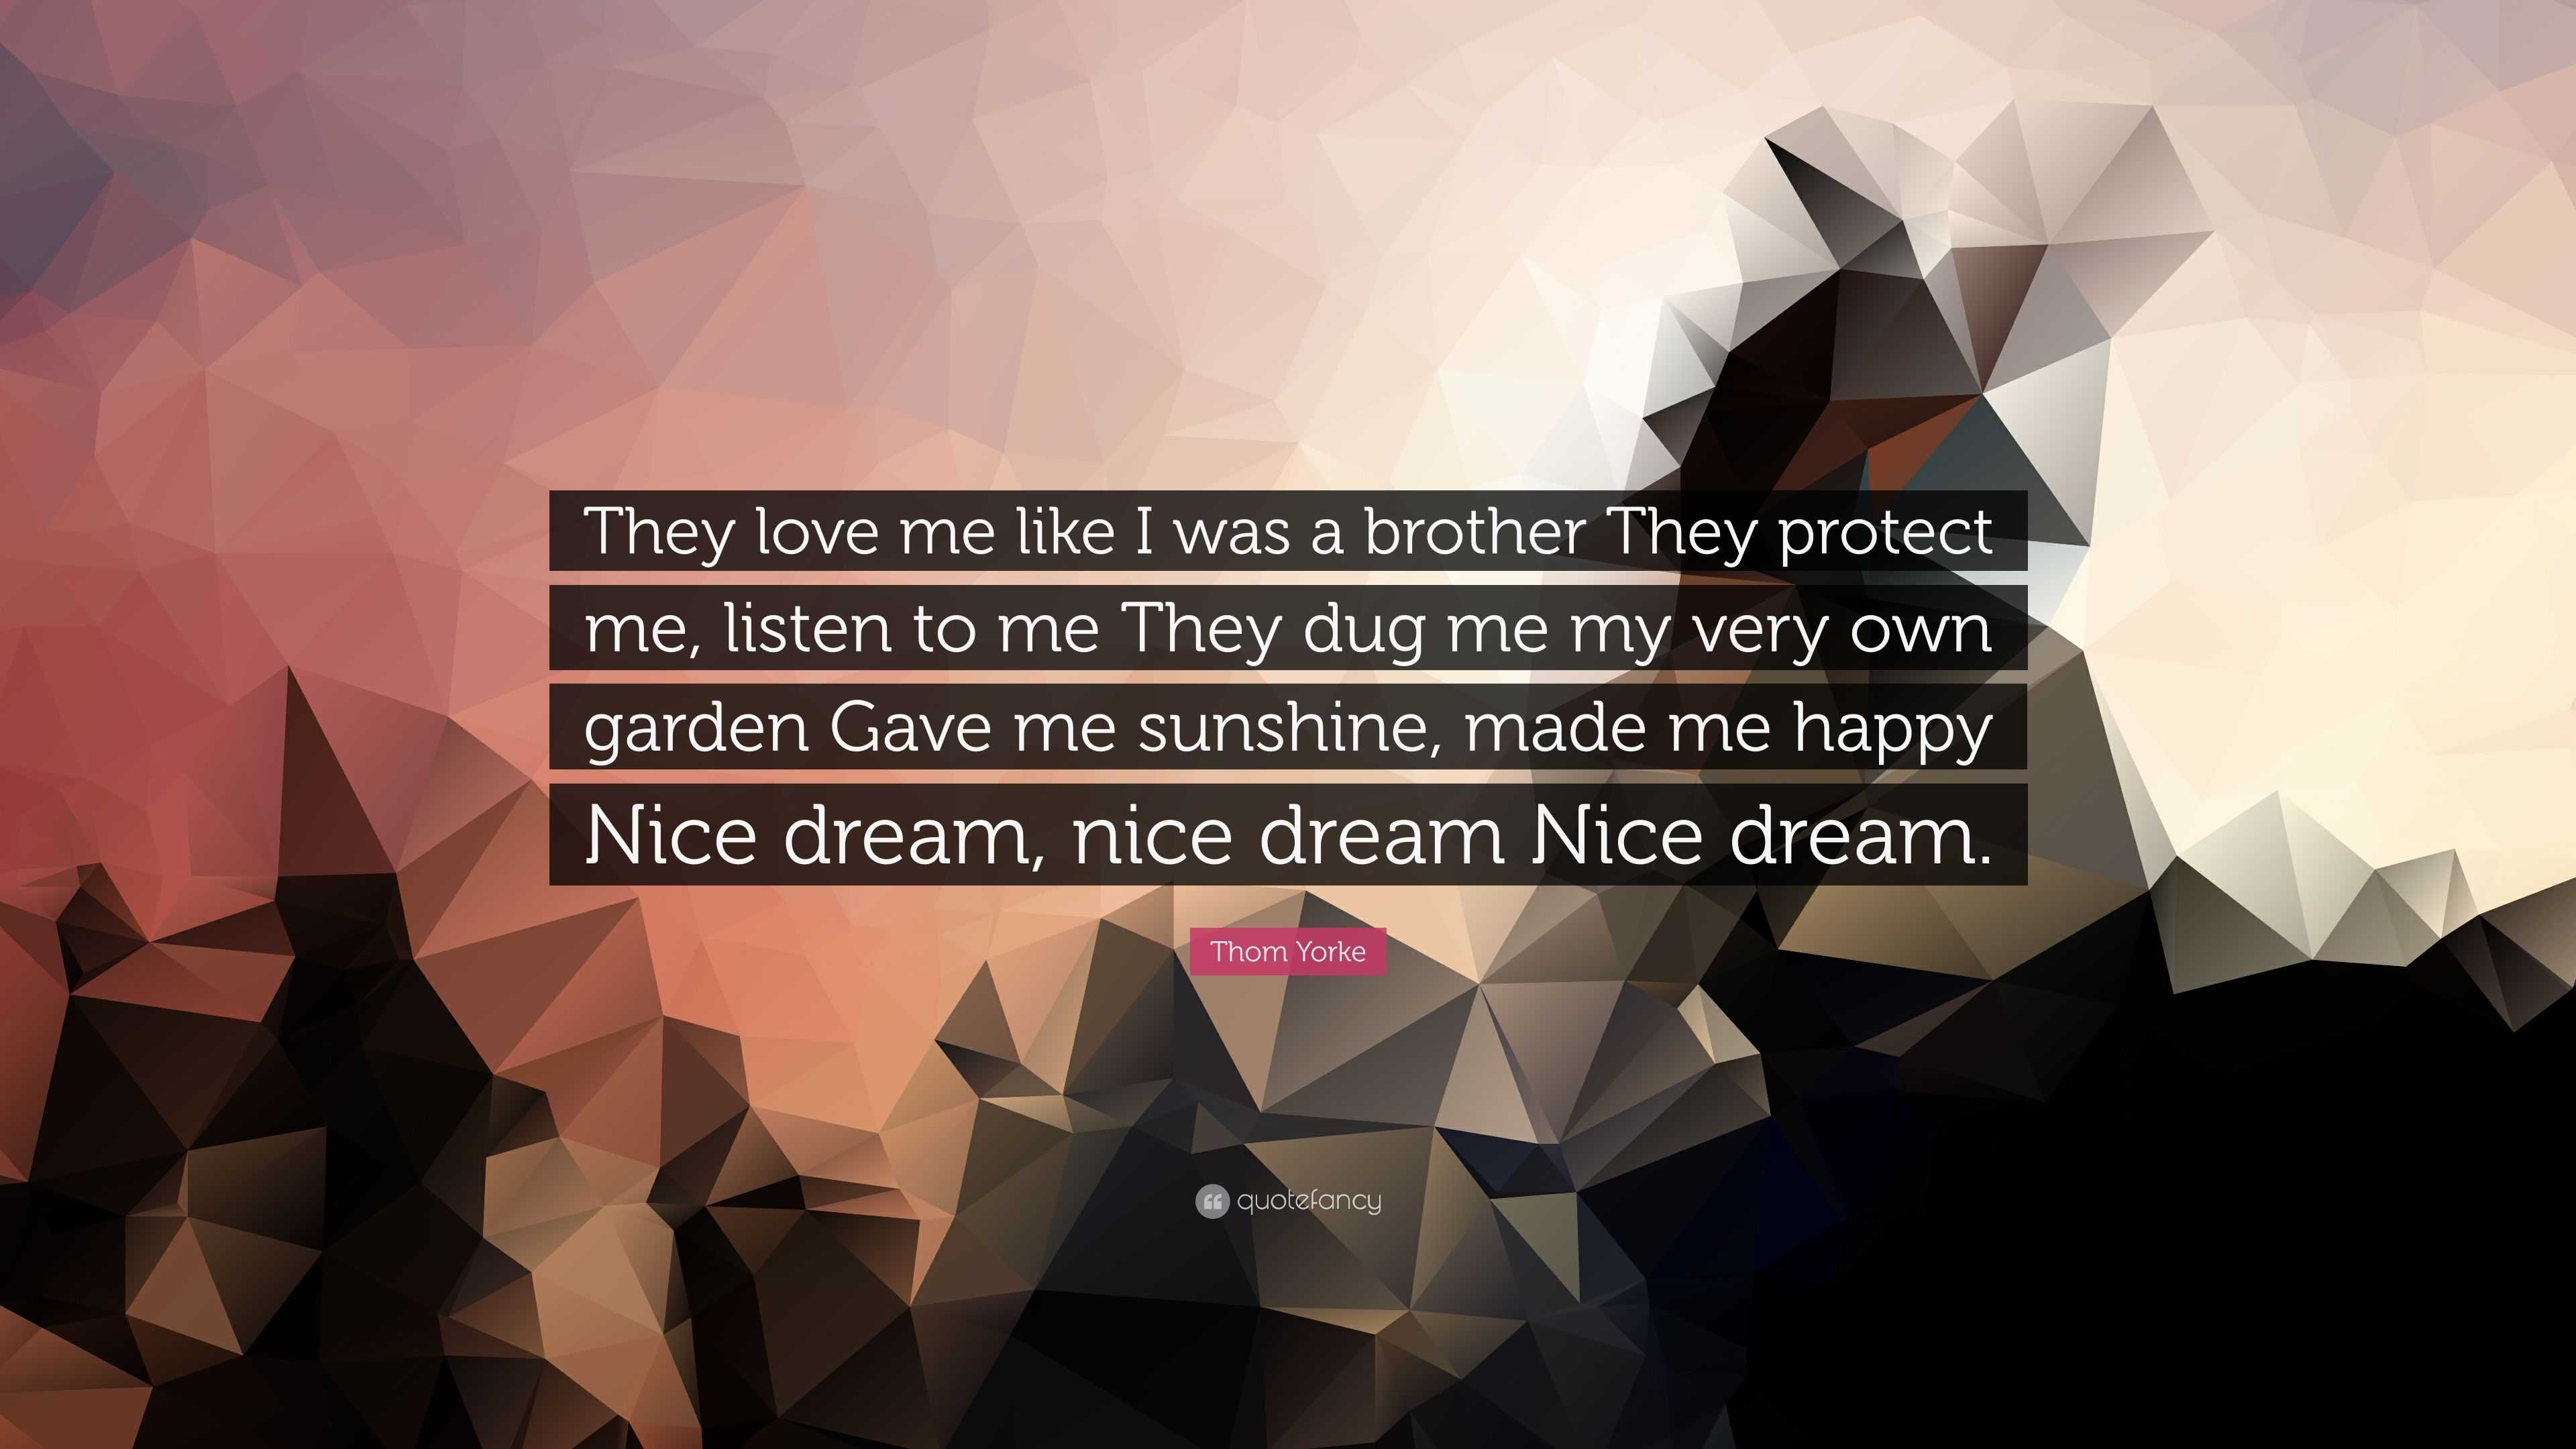 Thom Yorke Quote “They love me like I was a brother They protect me